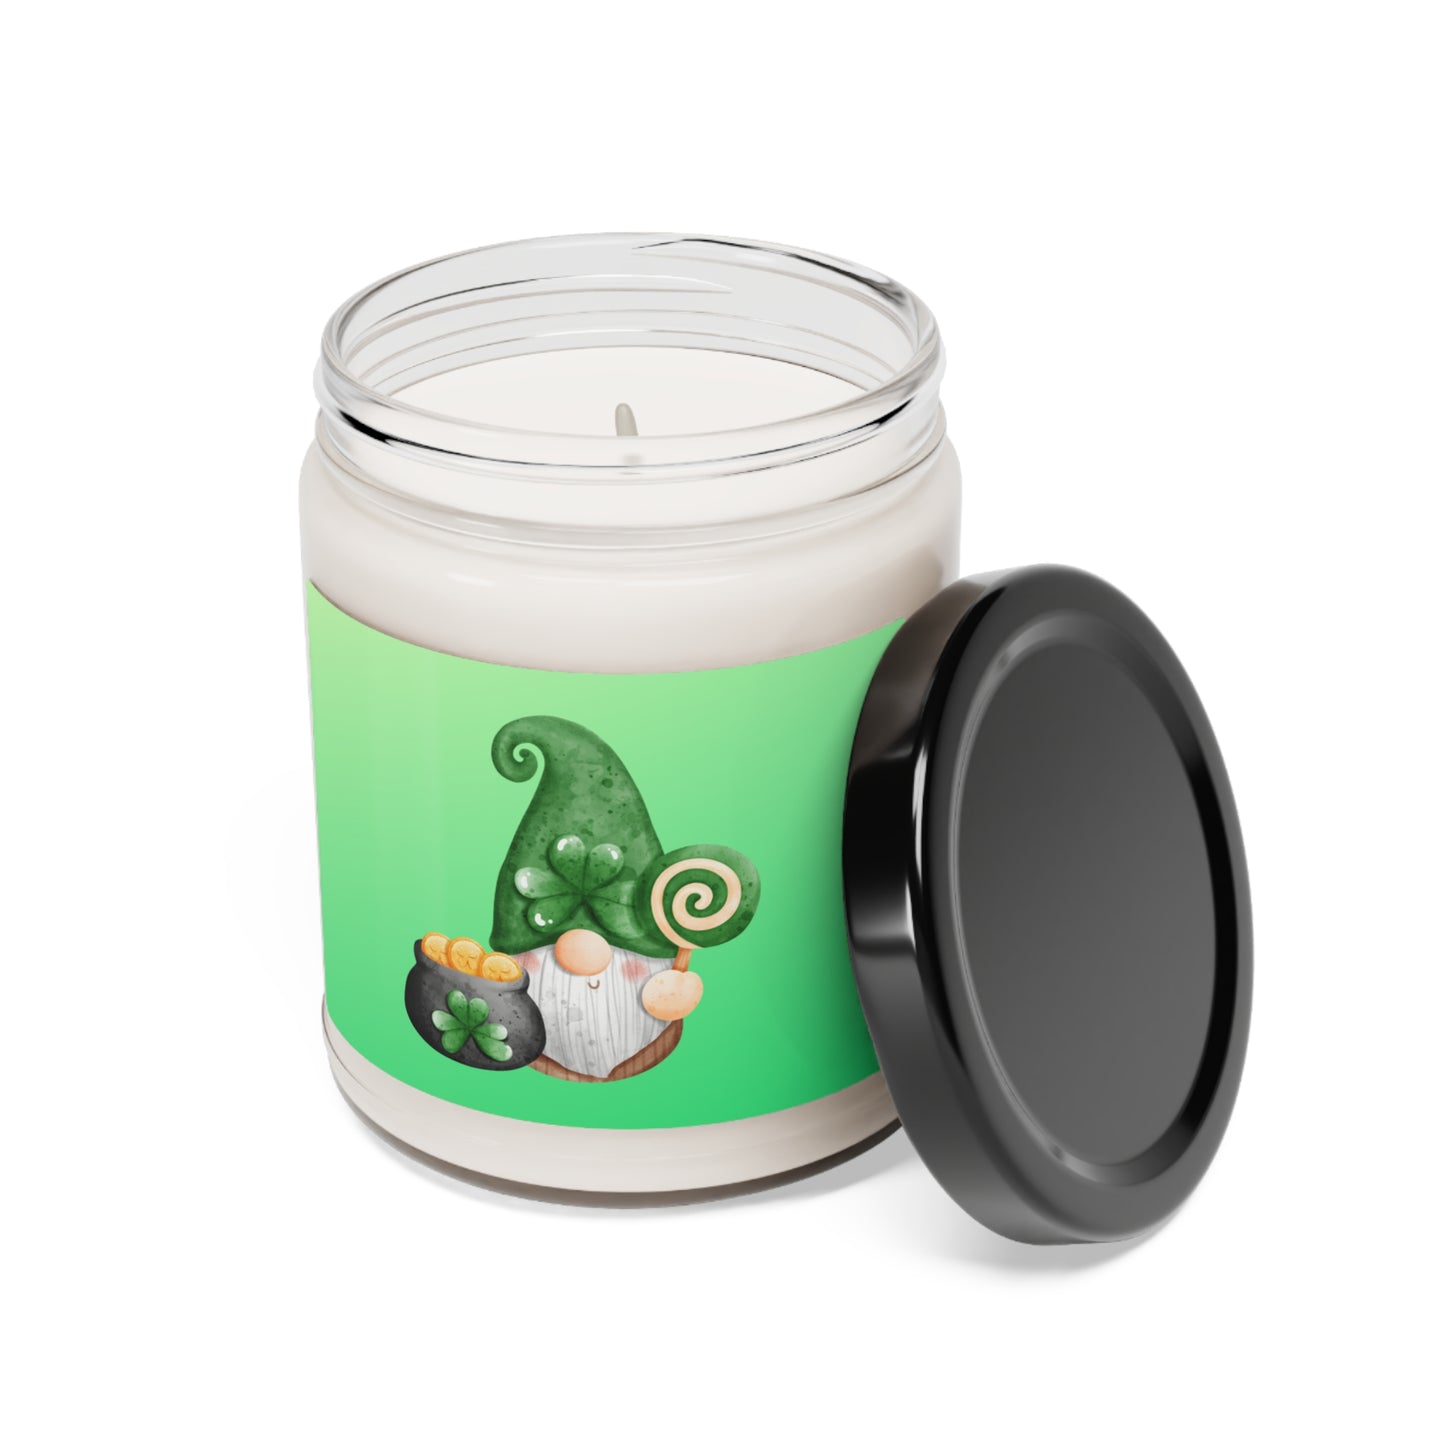 Shamrock Gnome Scented Soy Candle, 9oz - Made in USA